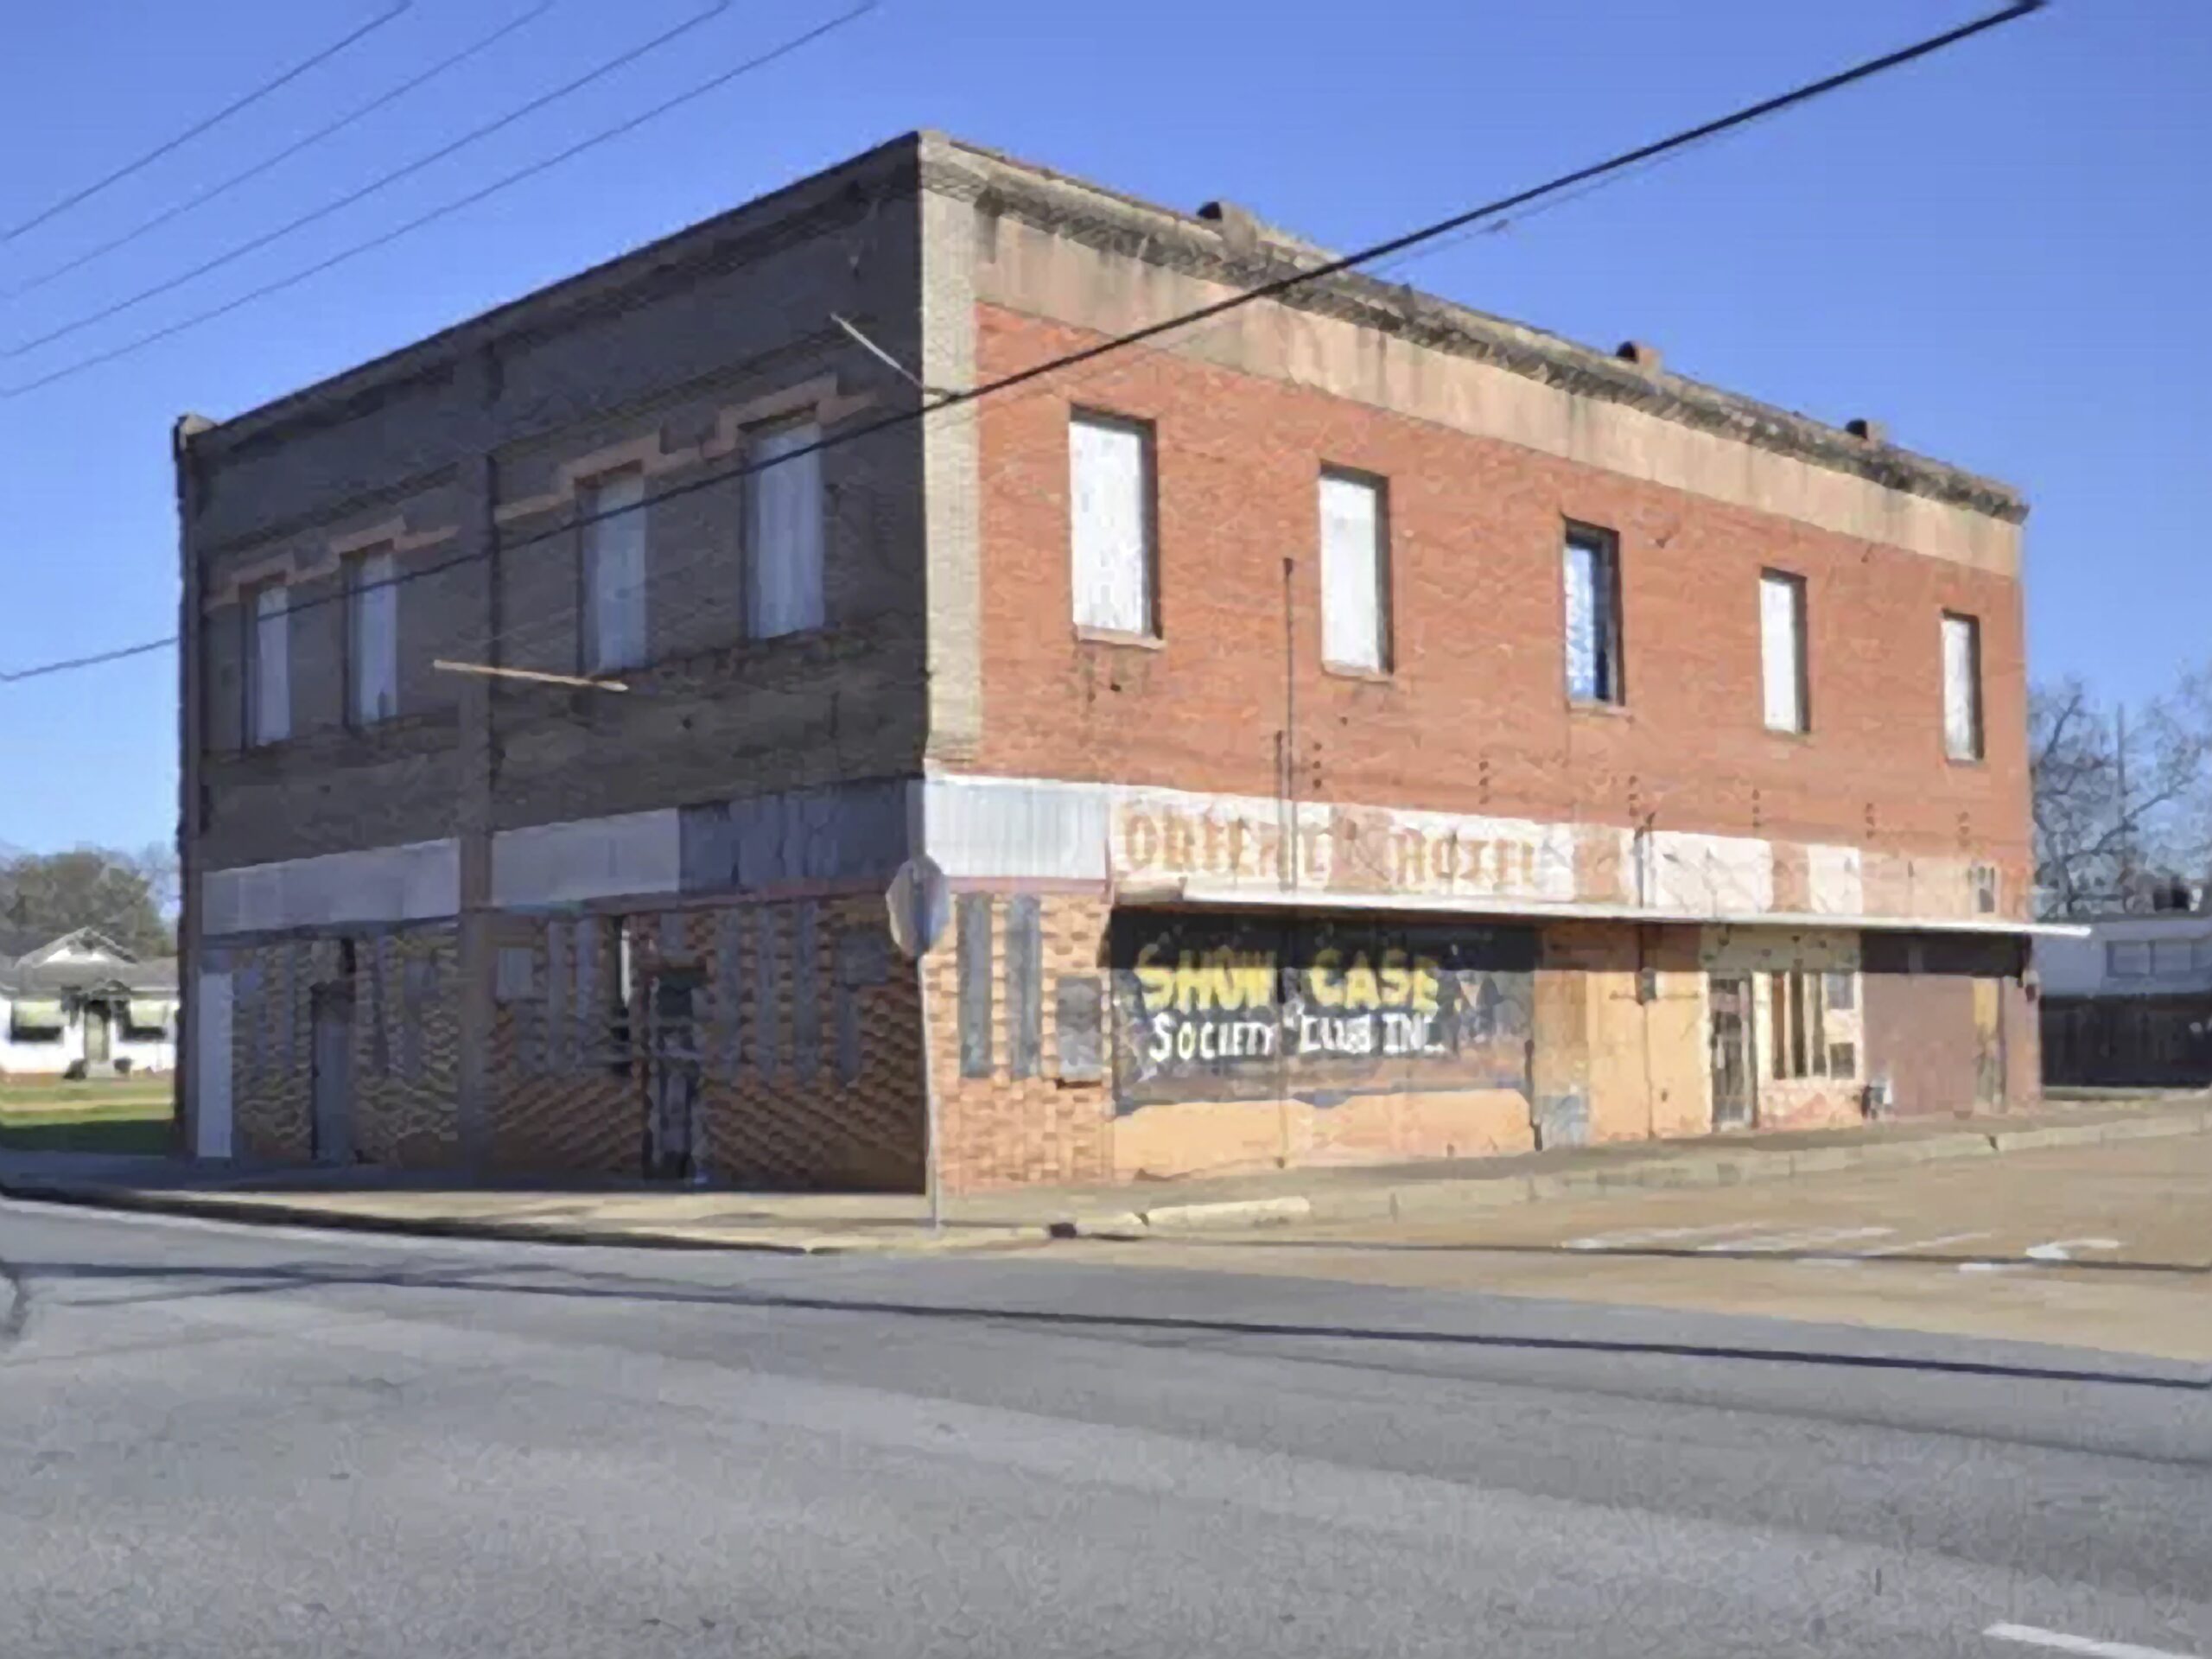 A Requiem for Lee Street and the Death of Port Arthur